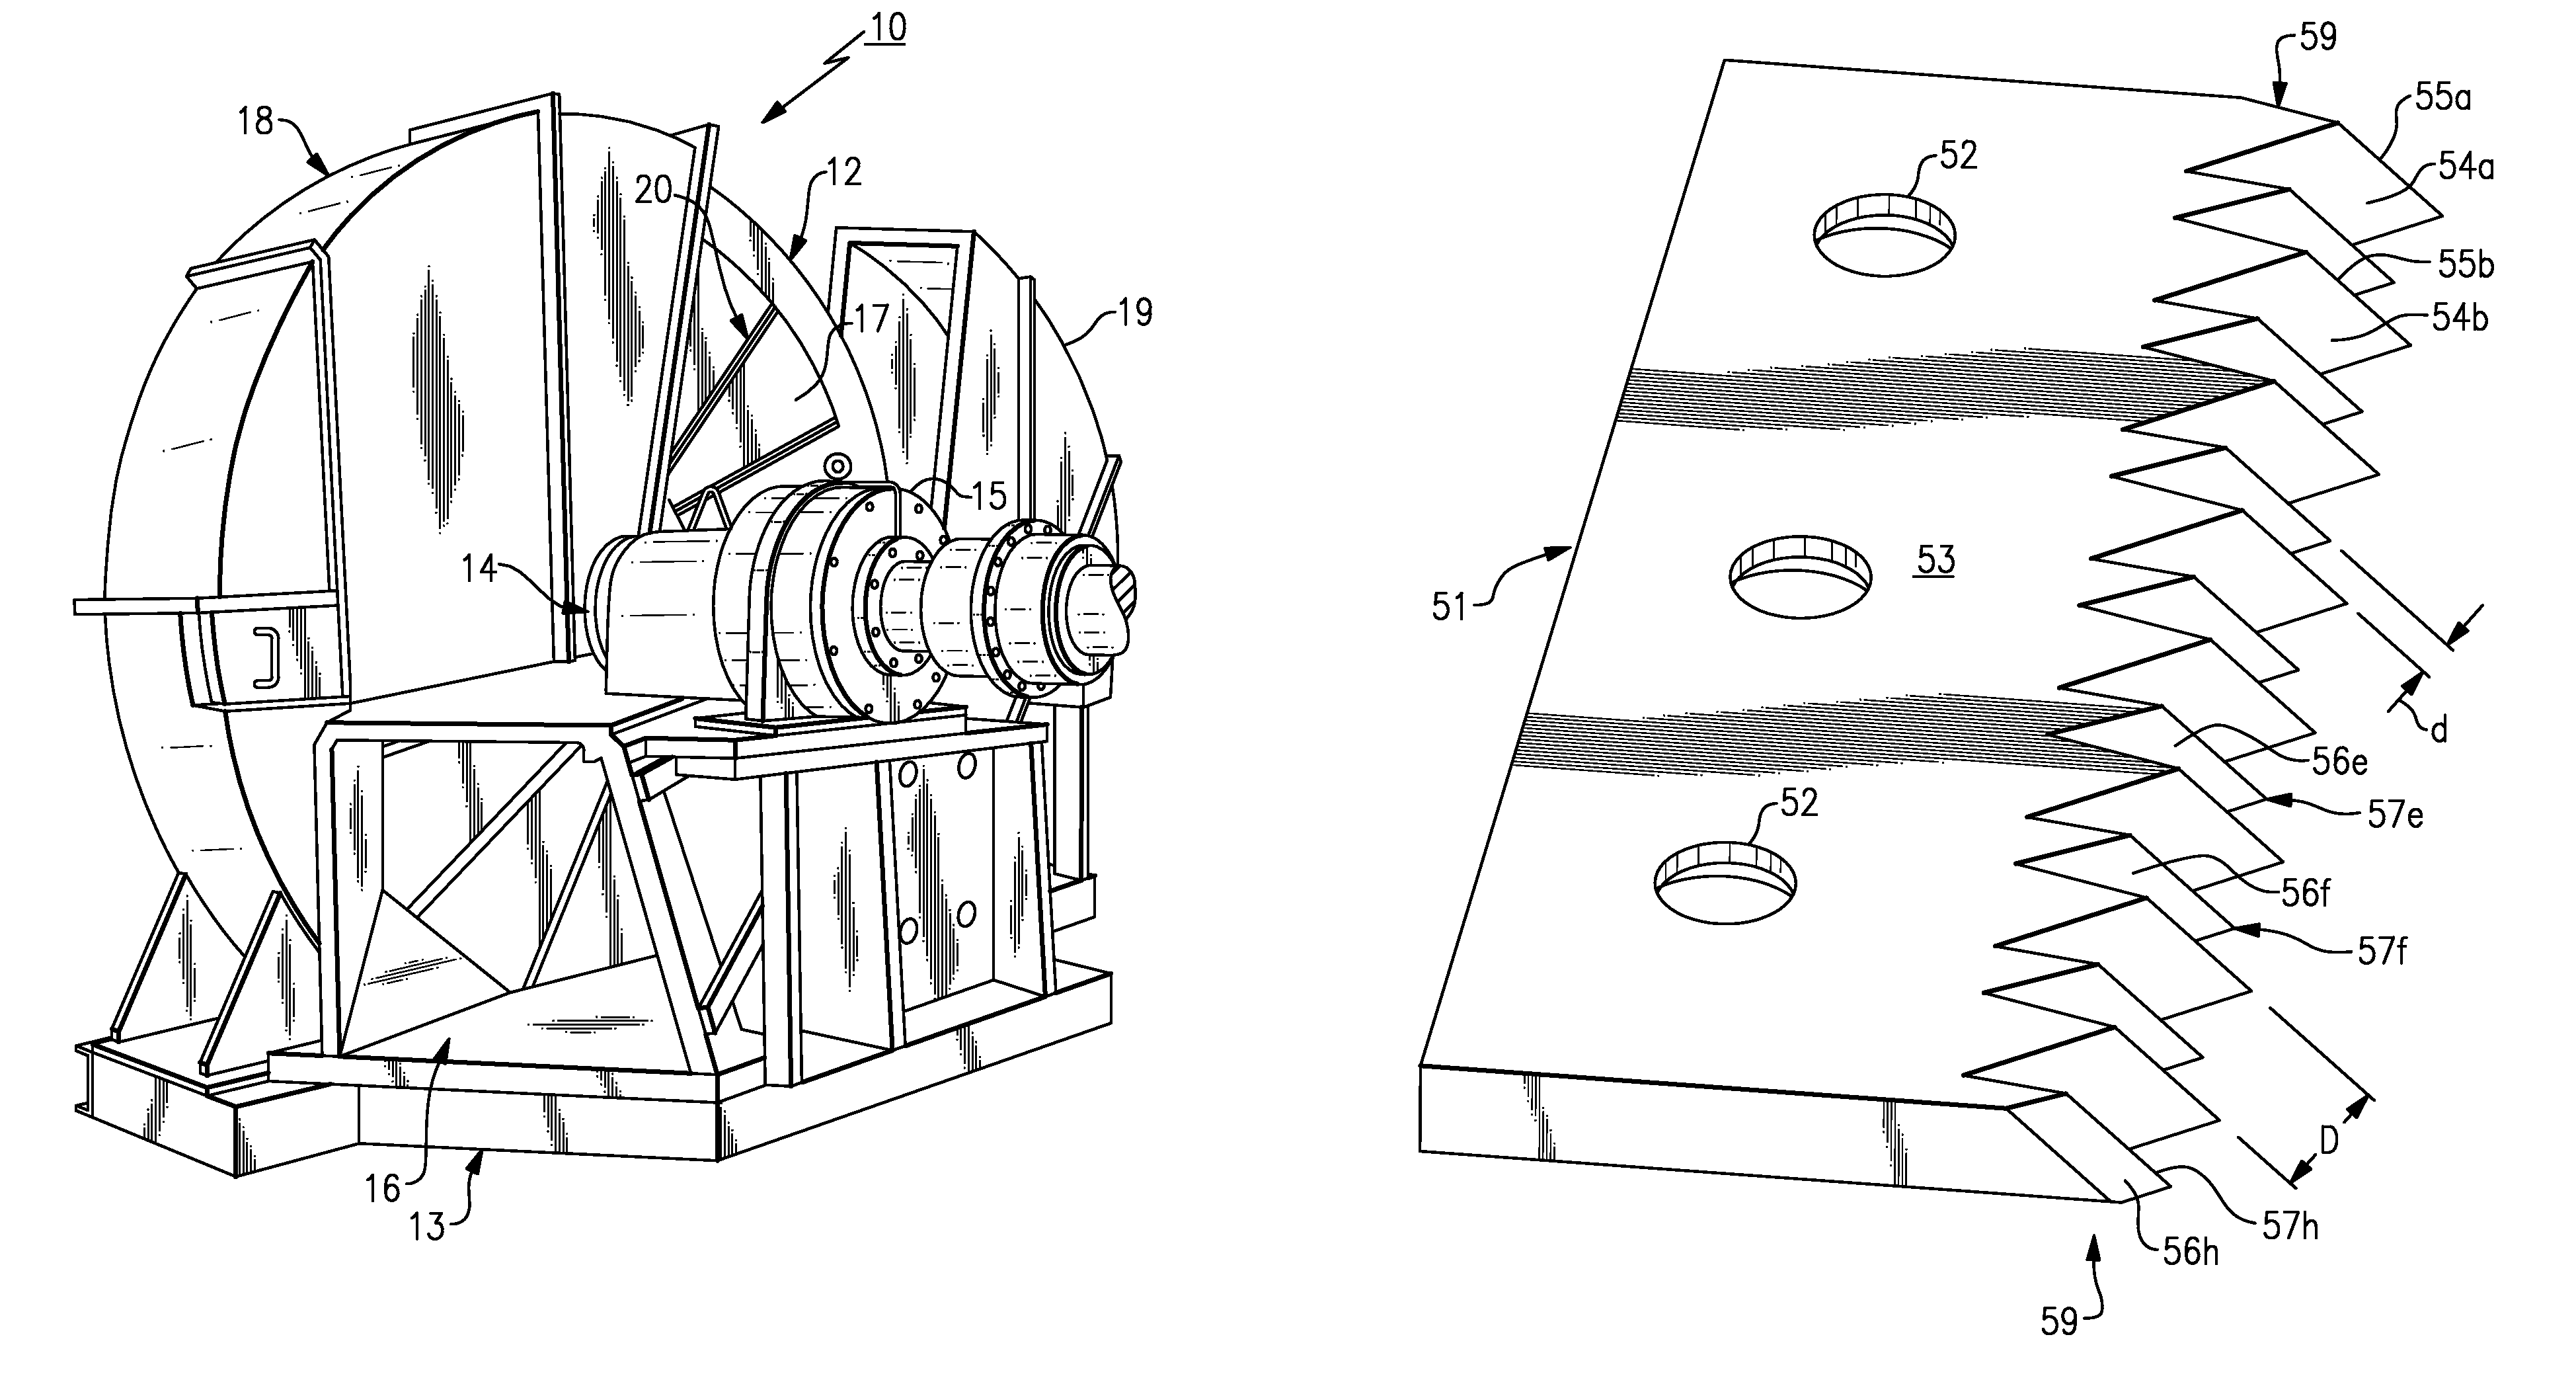 Primary and counter knife assembly for use in wood chipper